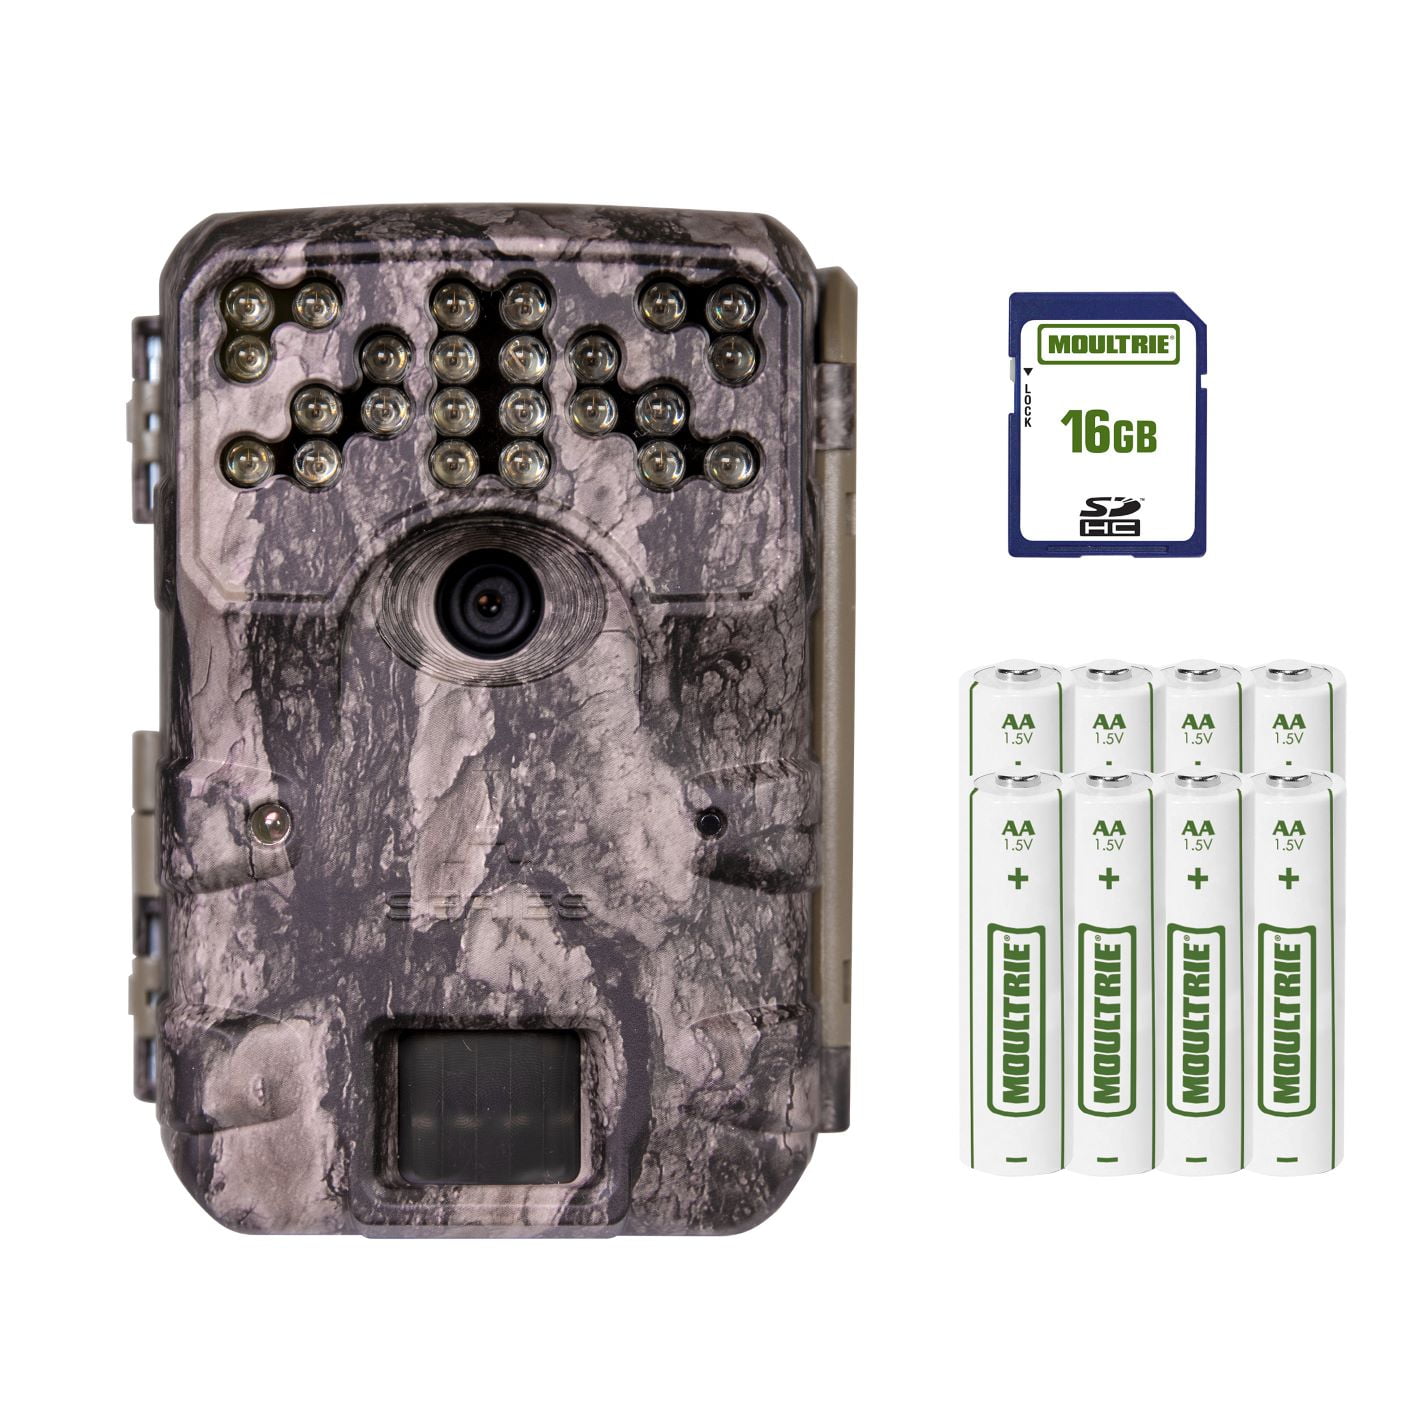 Moultrie W400 Infrared Hunting Trail Camera MCG13483 for sale online 